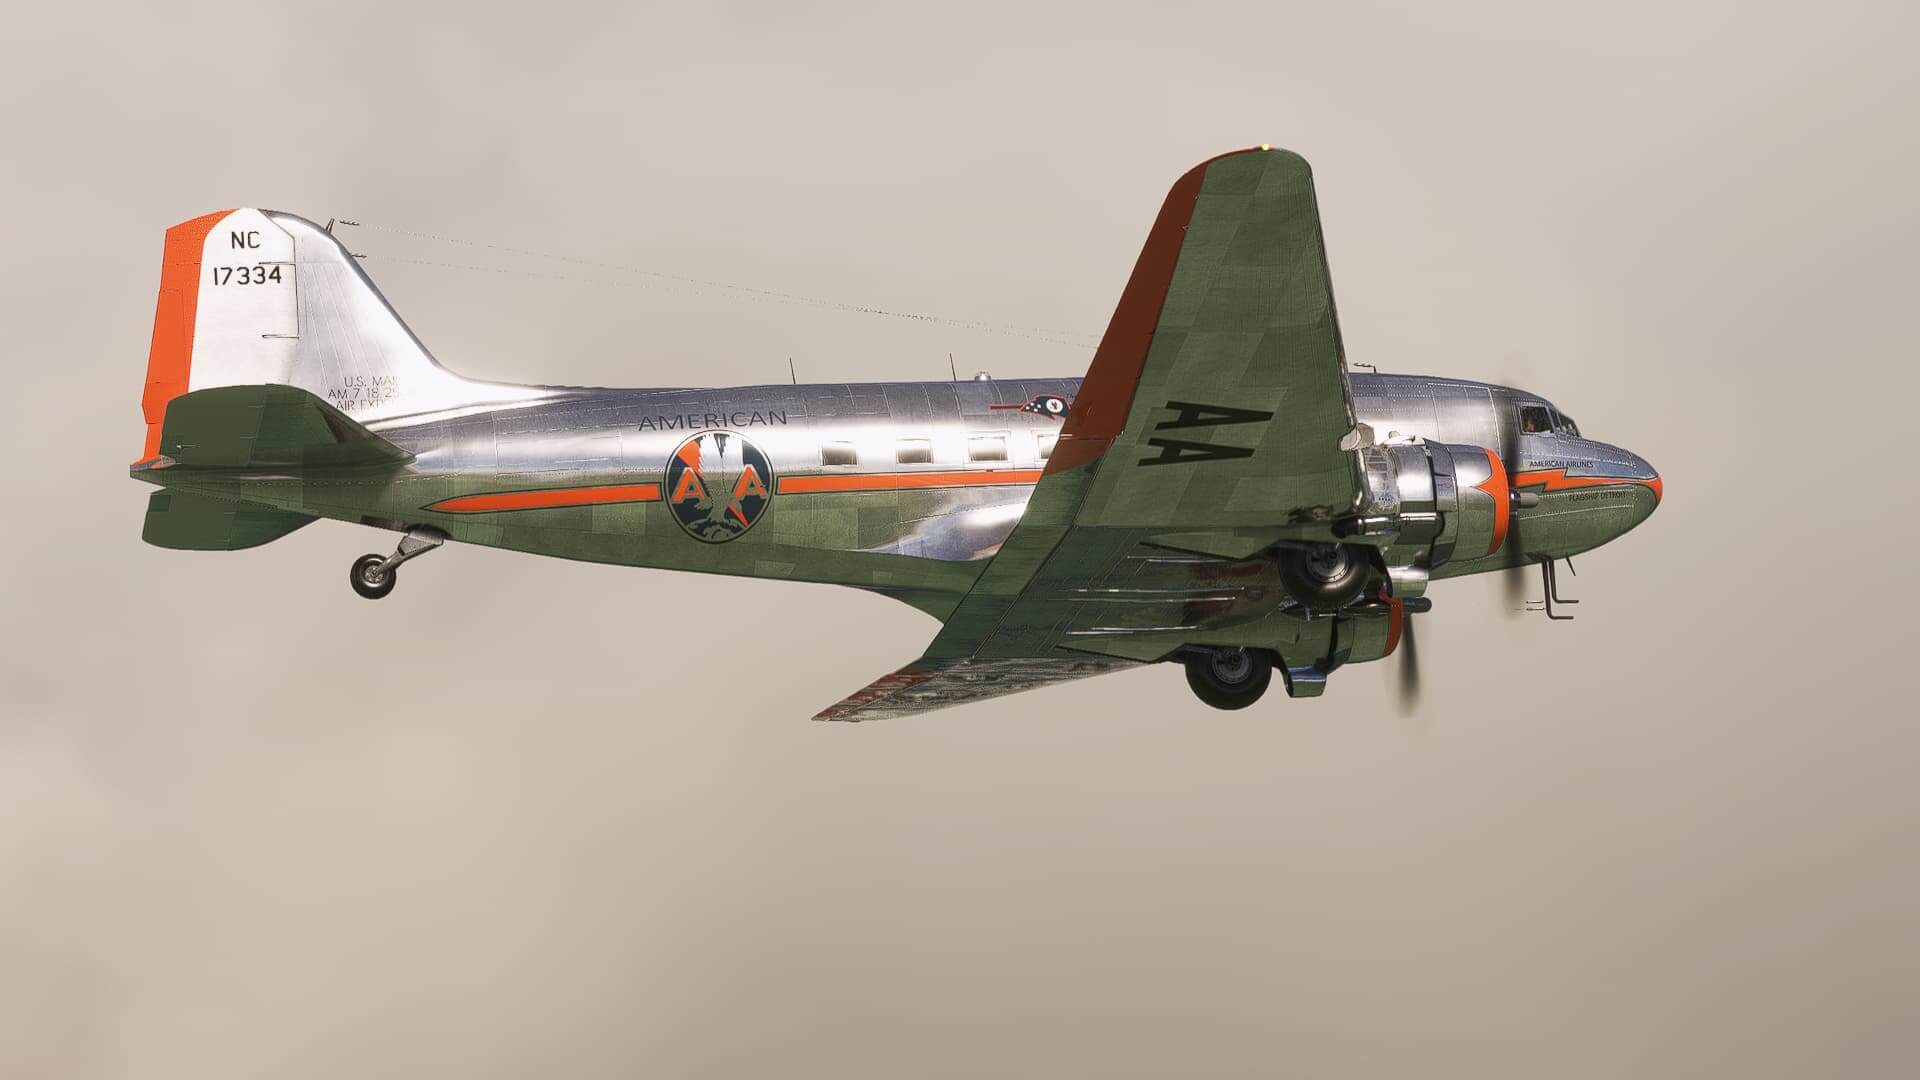 A silver and orange American DC-3 banks left amongst stormy clouds